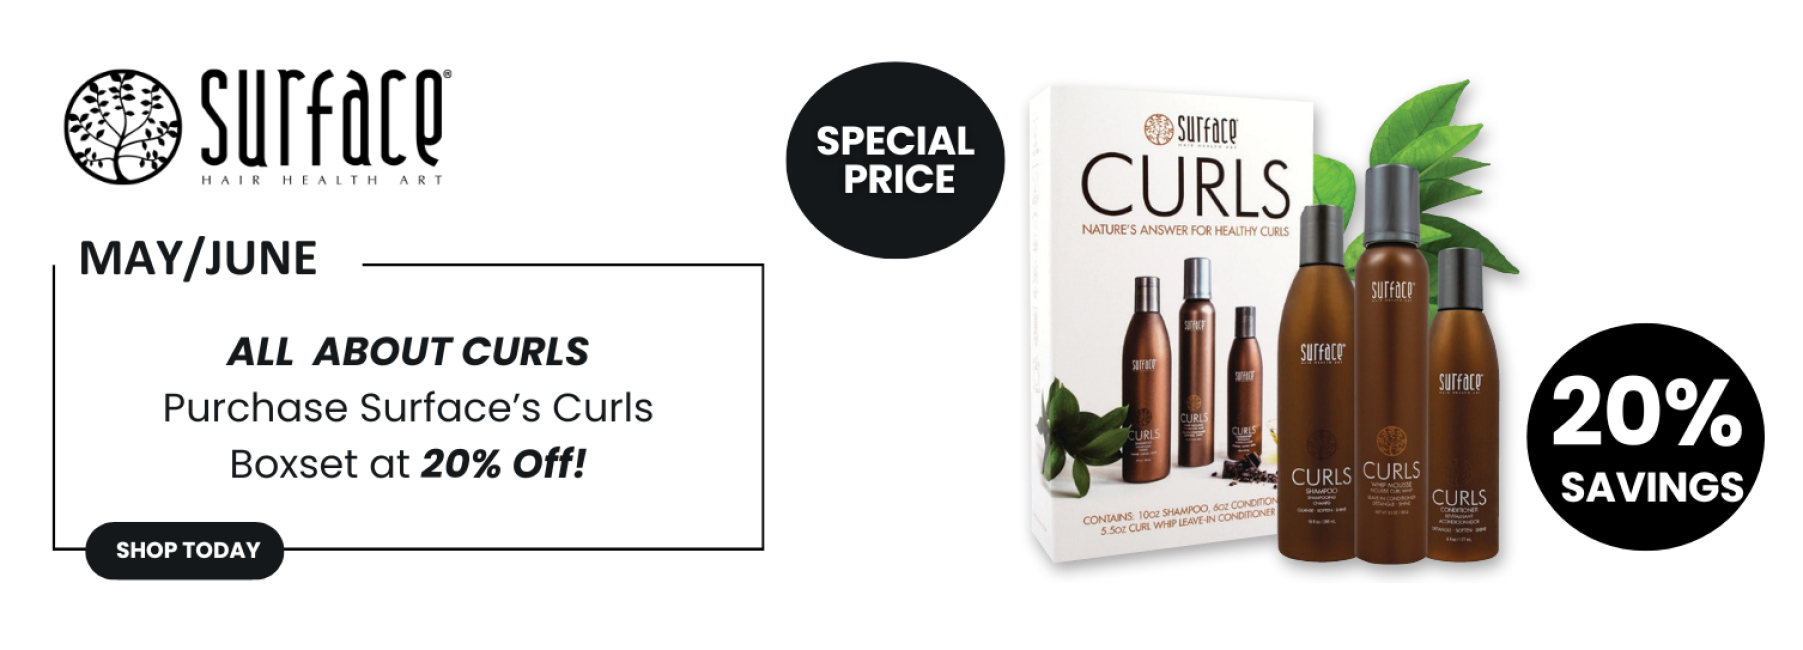 SURFACE CURLS KIT OFFER MAY_JUNE